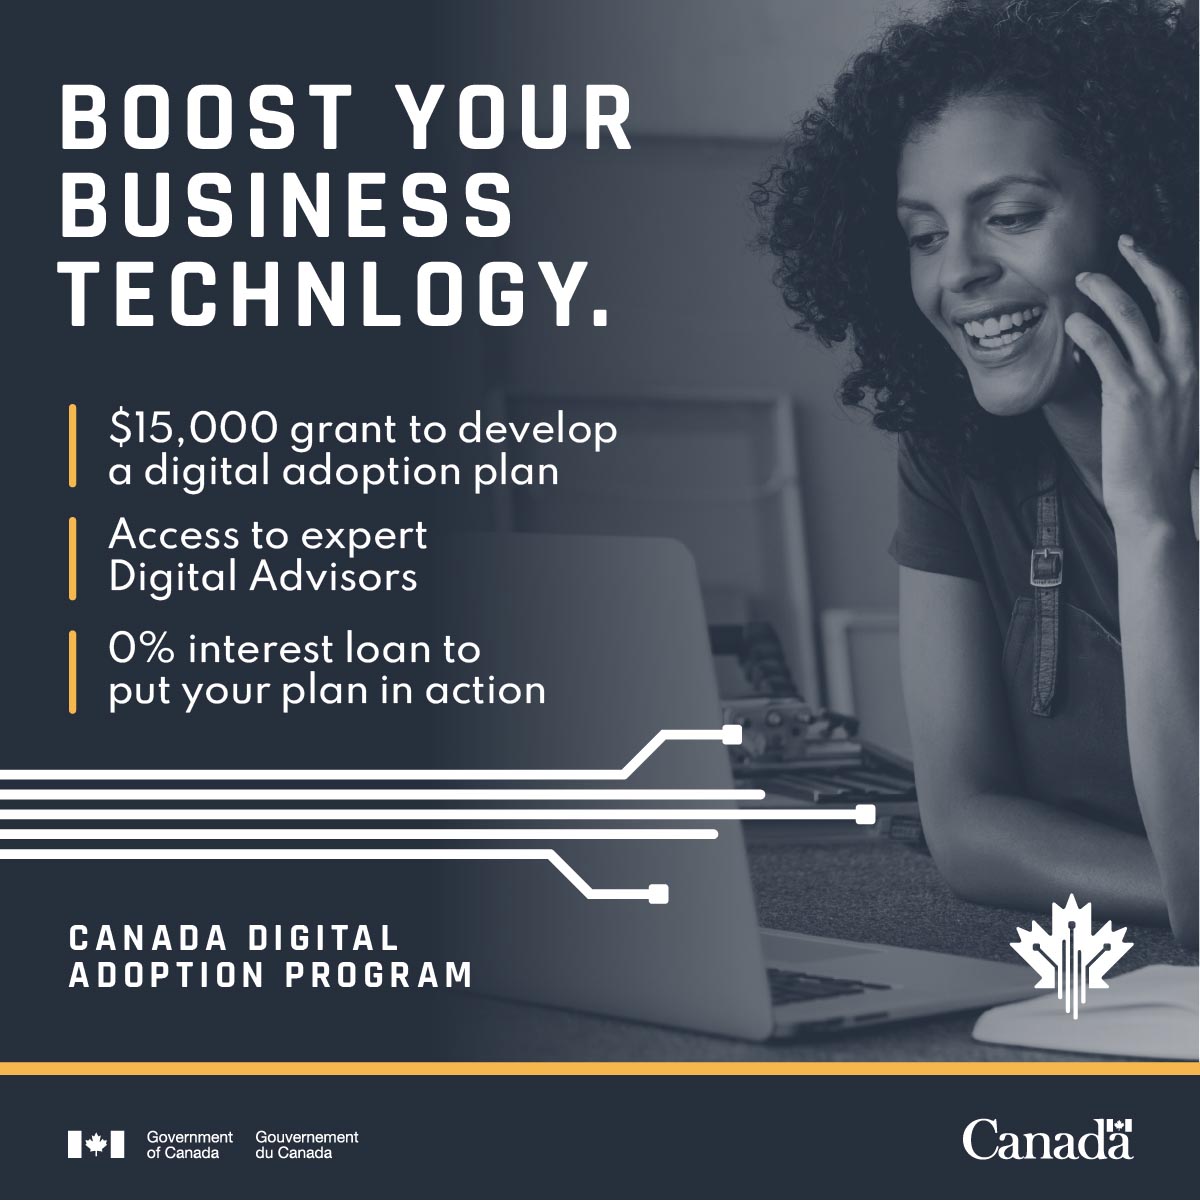 Boost Your Business Technology. $15,000 grant to develop a digital adoption plan. Access to expert digital advisors. 0% interest loan to put your plan in action. Canada Digital Adoption Program